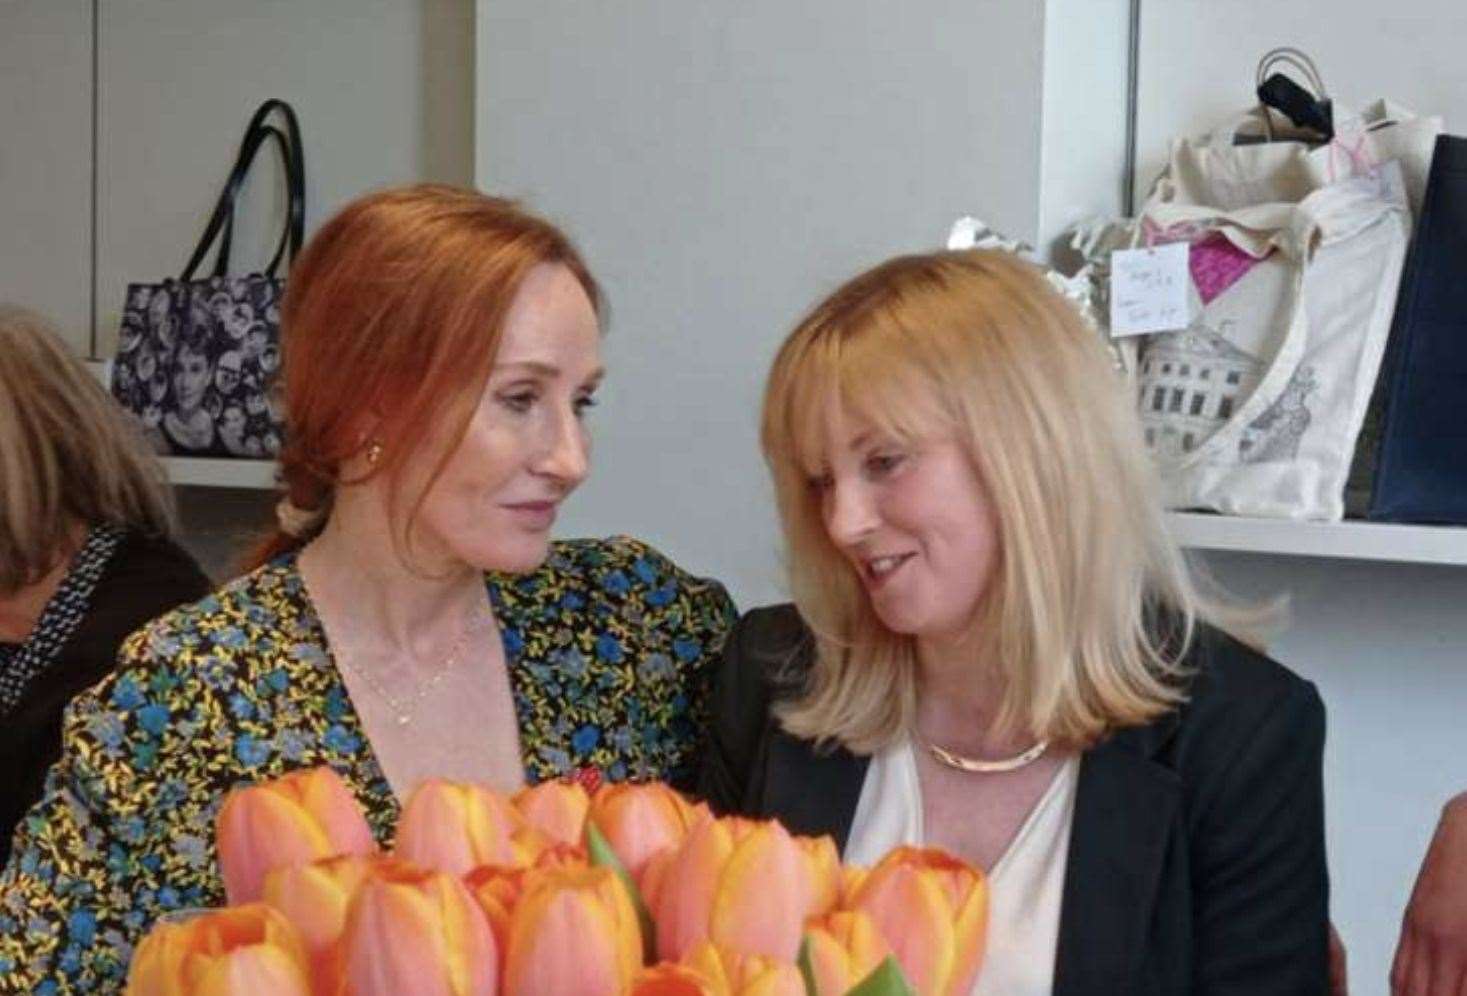 Harry Potter author JK Rowling and Canterbury parliamentary candidate Rosie Duffield. Picture: Twitter/@jk_rowling